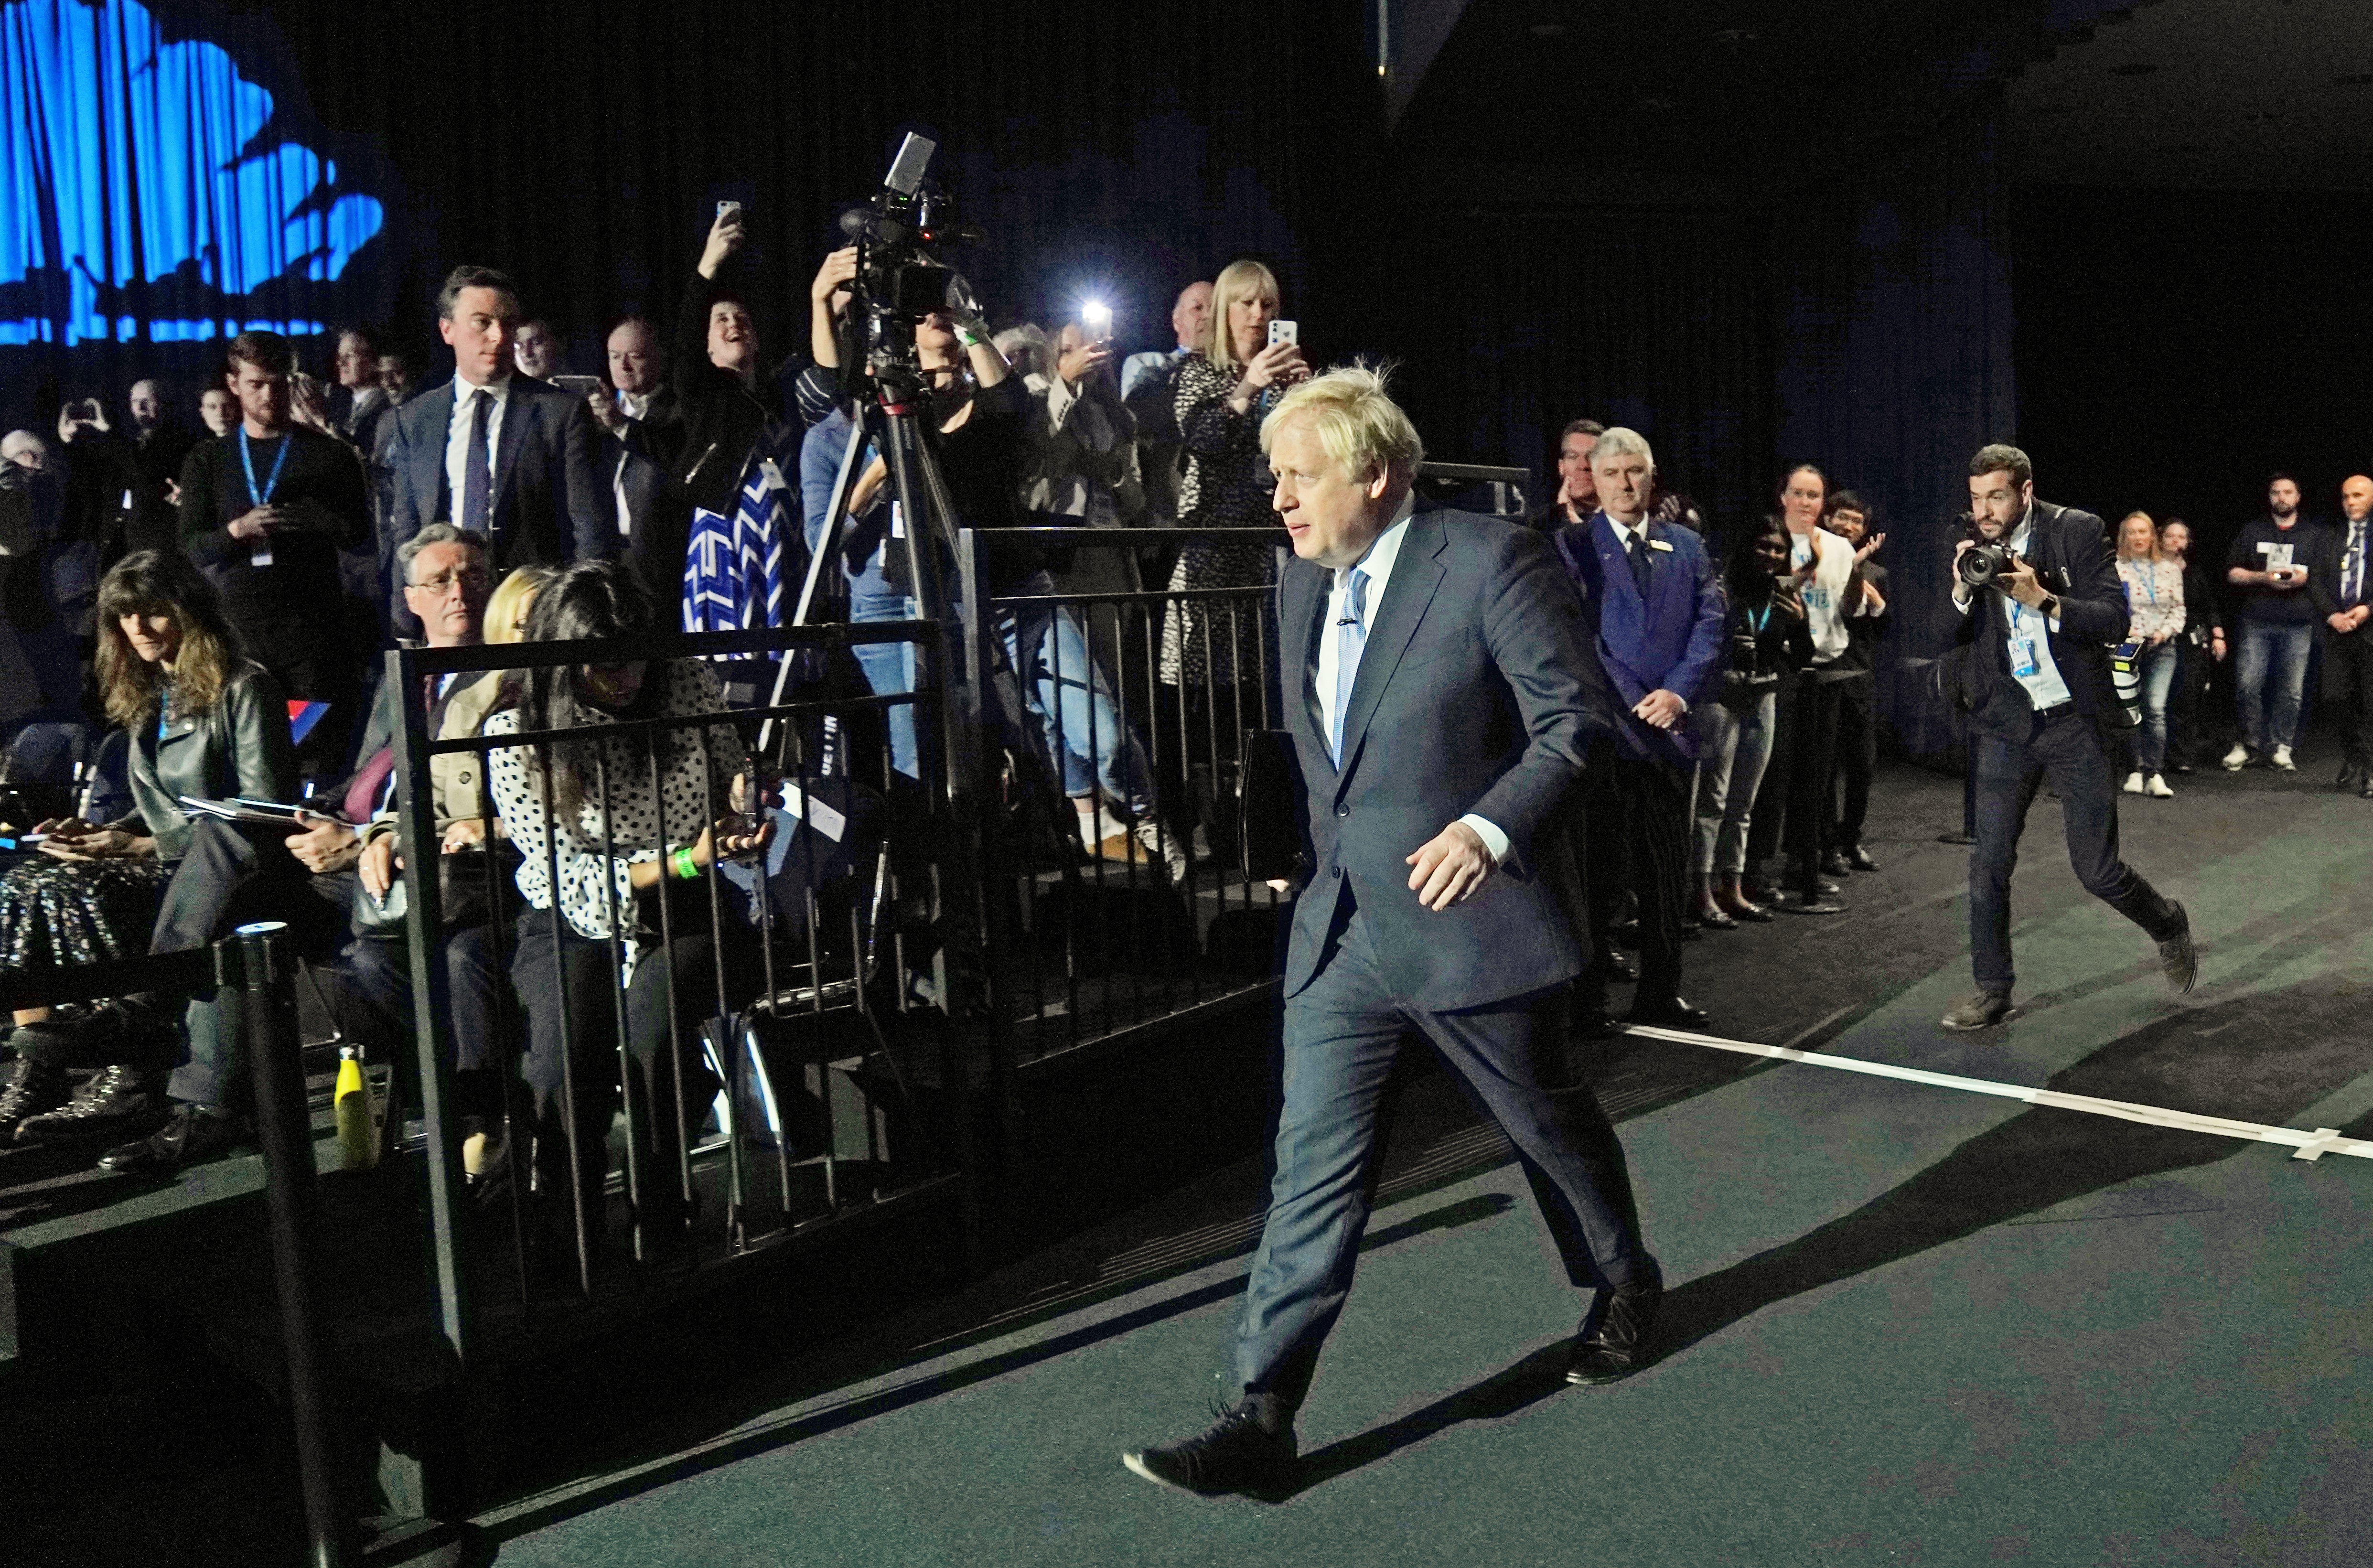 Boris Johnson arrives to deliver his speech at the Conservative Party conference